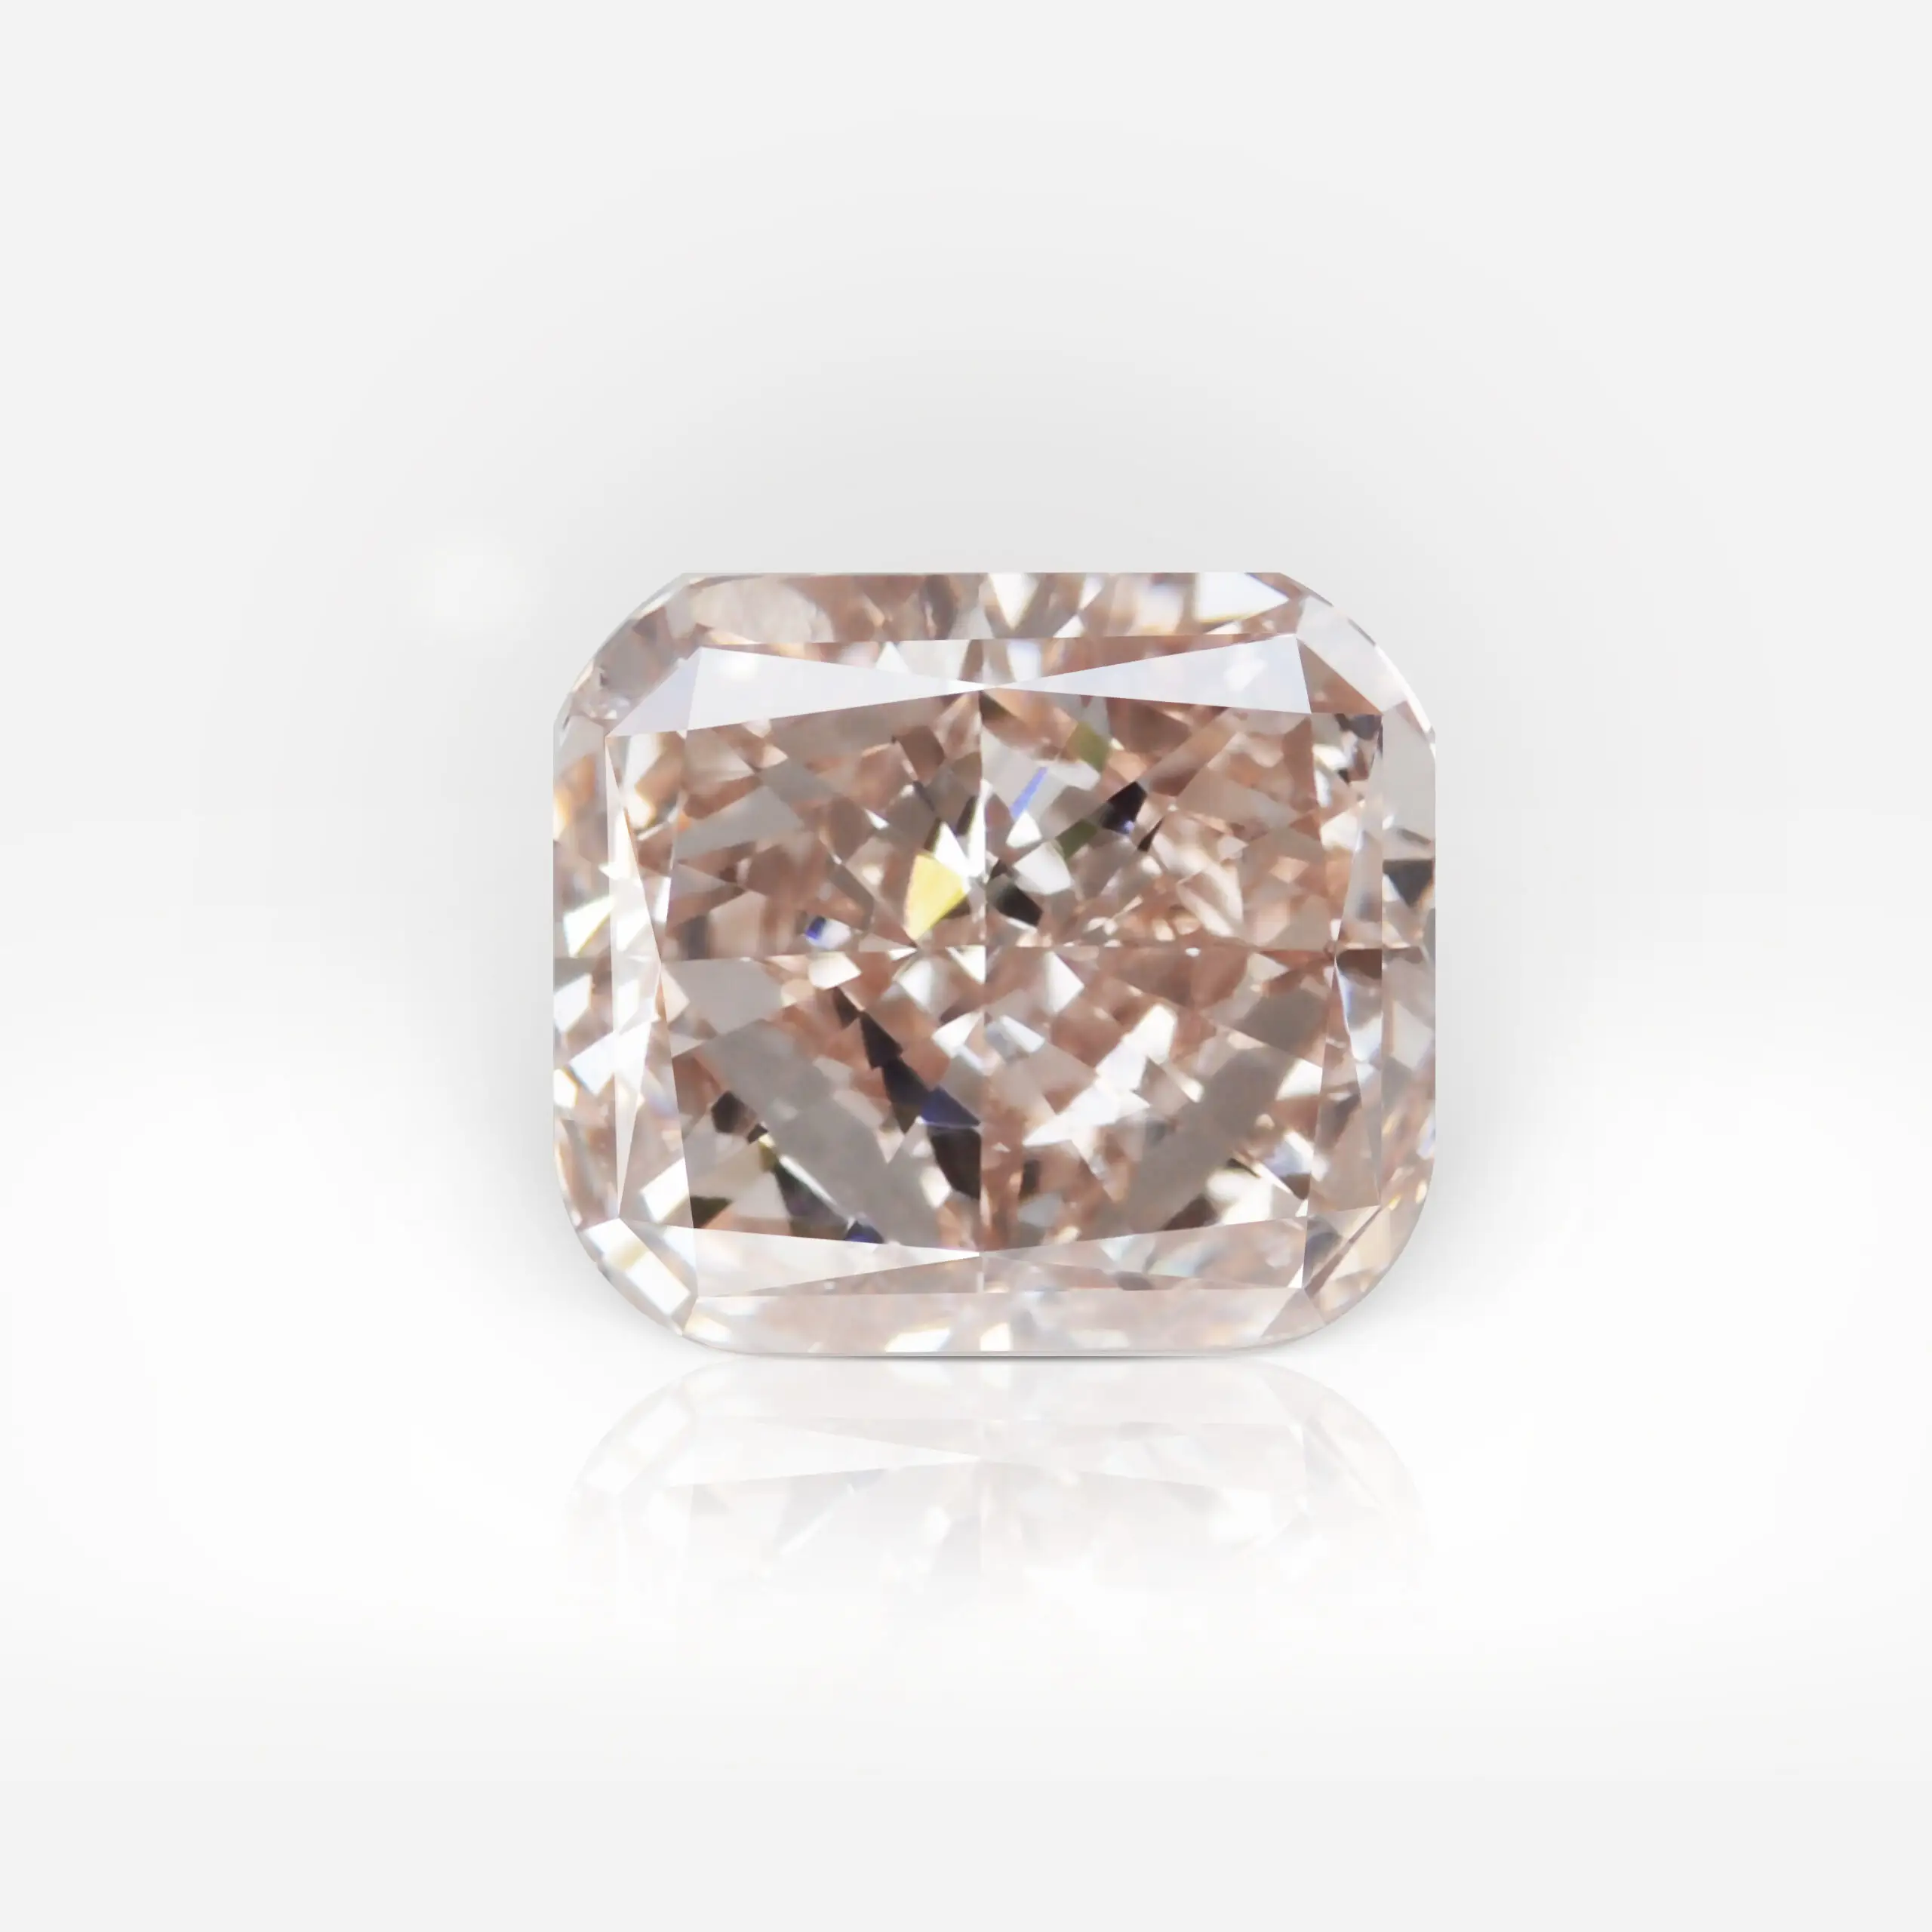 1.00 carat Fancy Brown Pink VS2 Radiant Shape Diamond GIA - picture 1